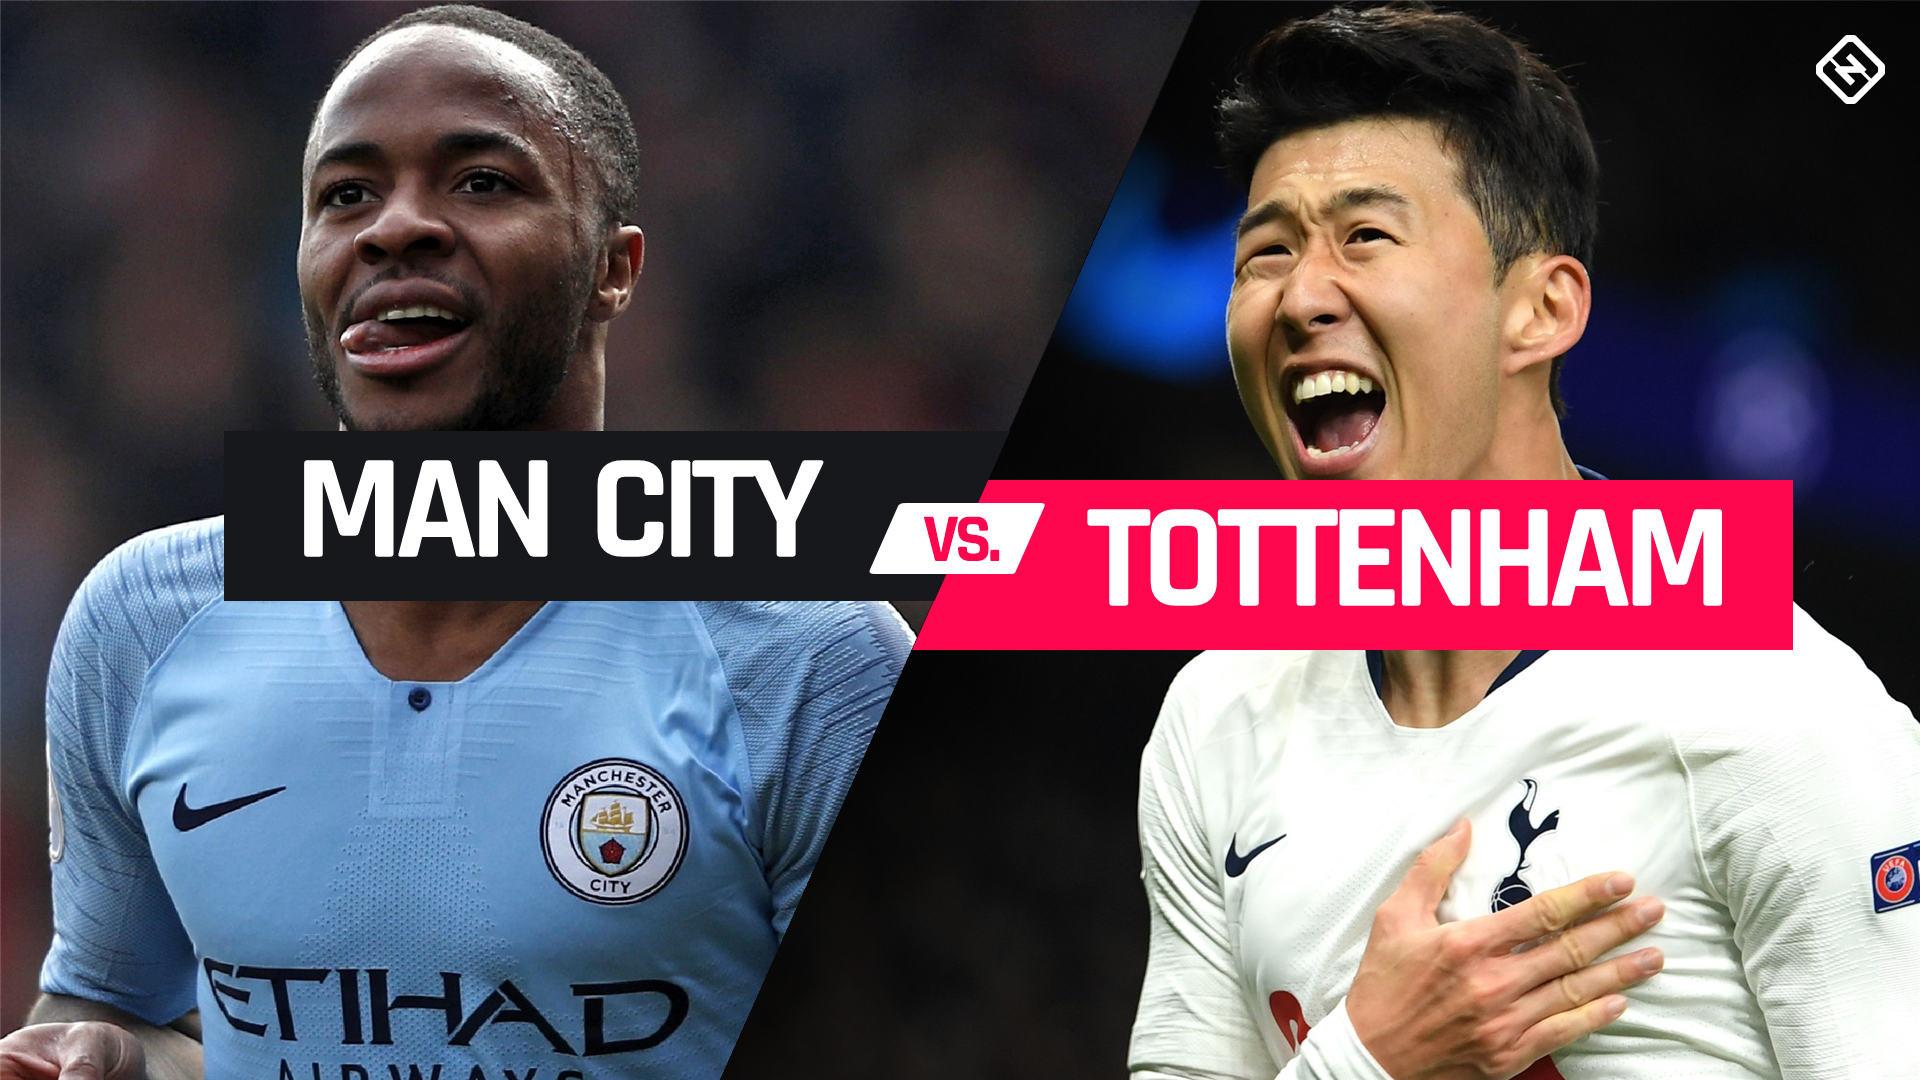 Champions League How to watch Manchester City vs. Tottenham live in